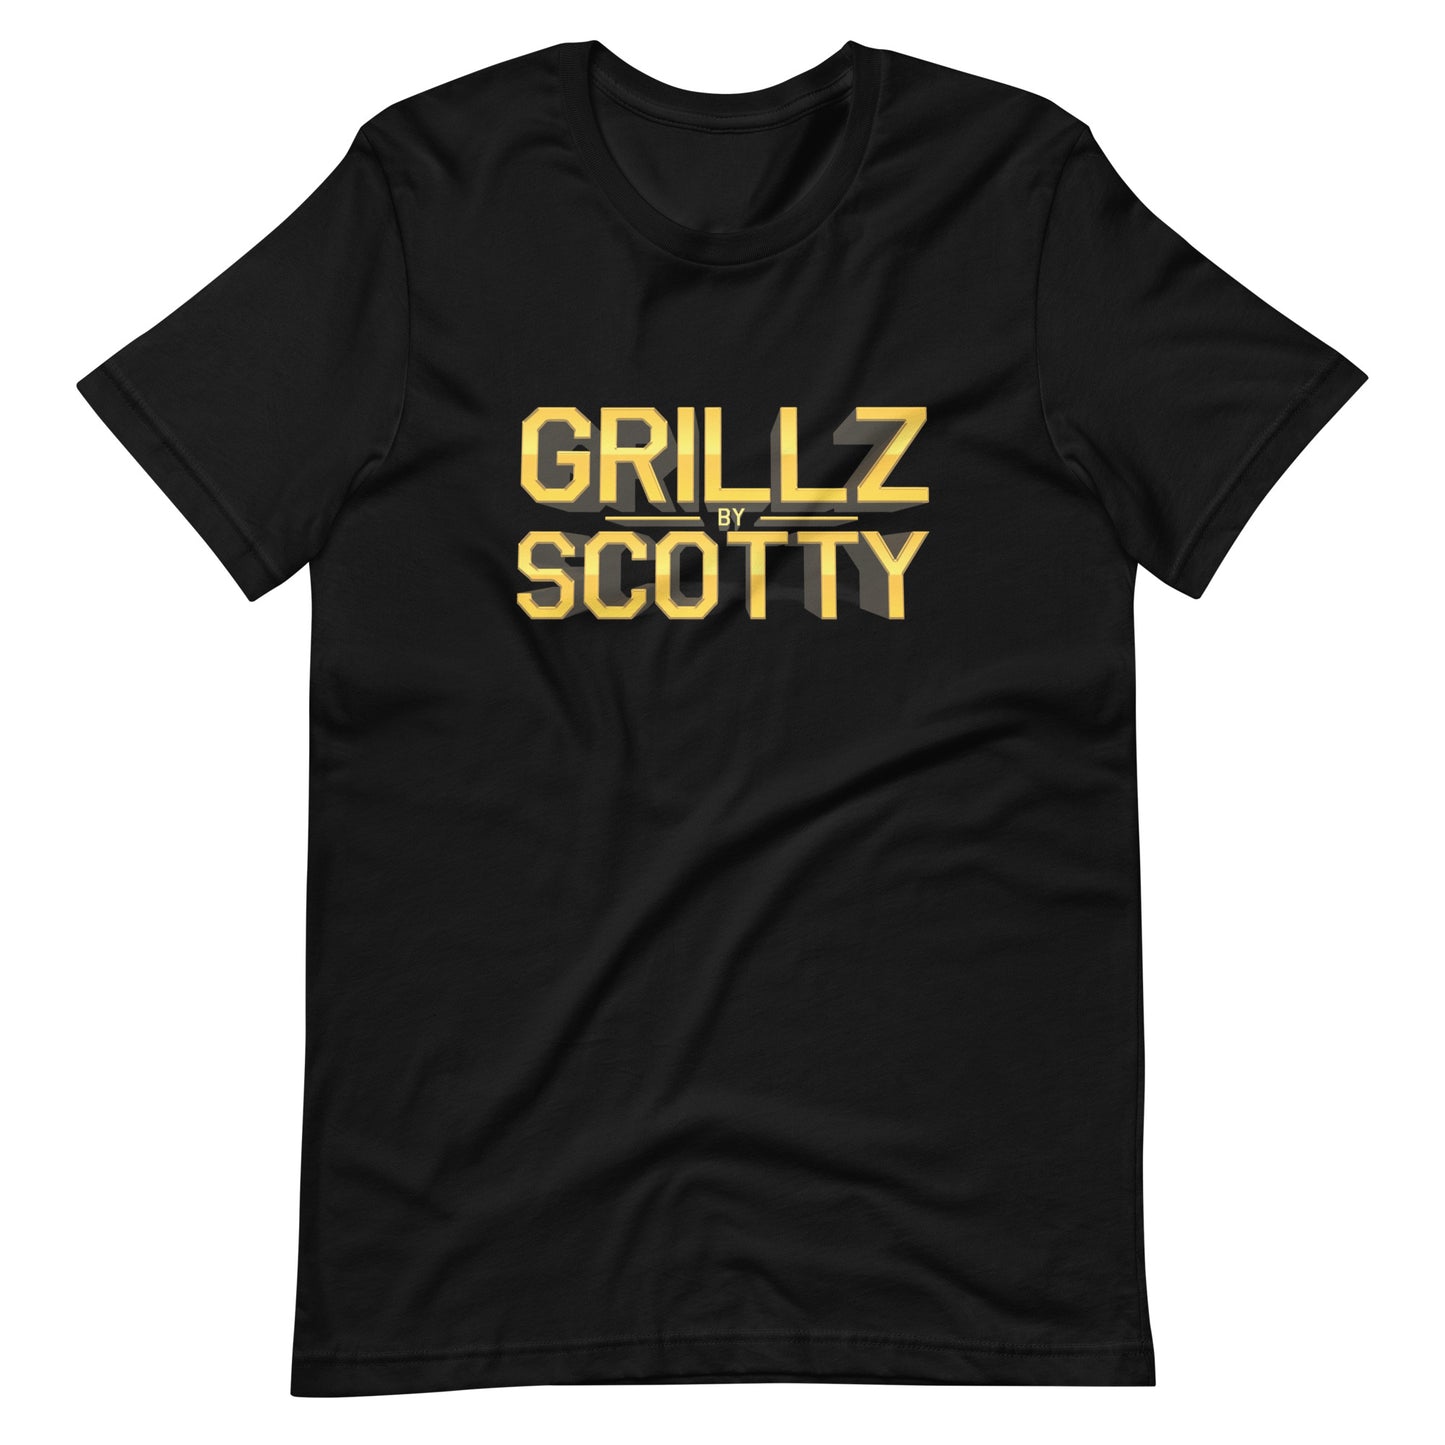 Grillz by Scotty Tee